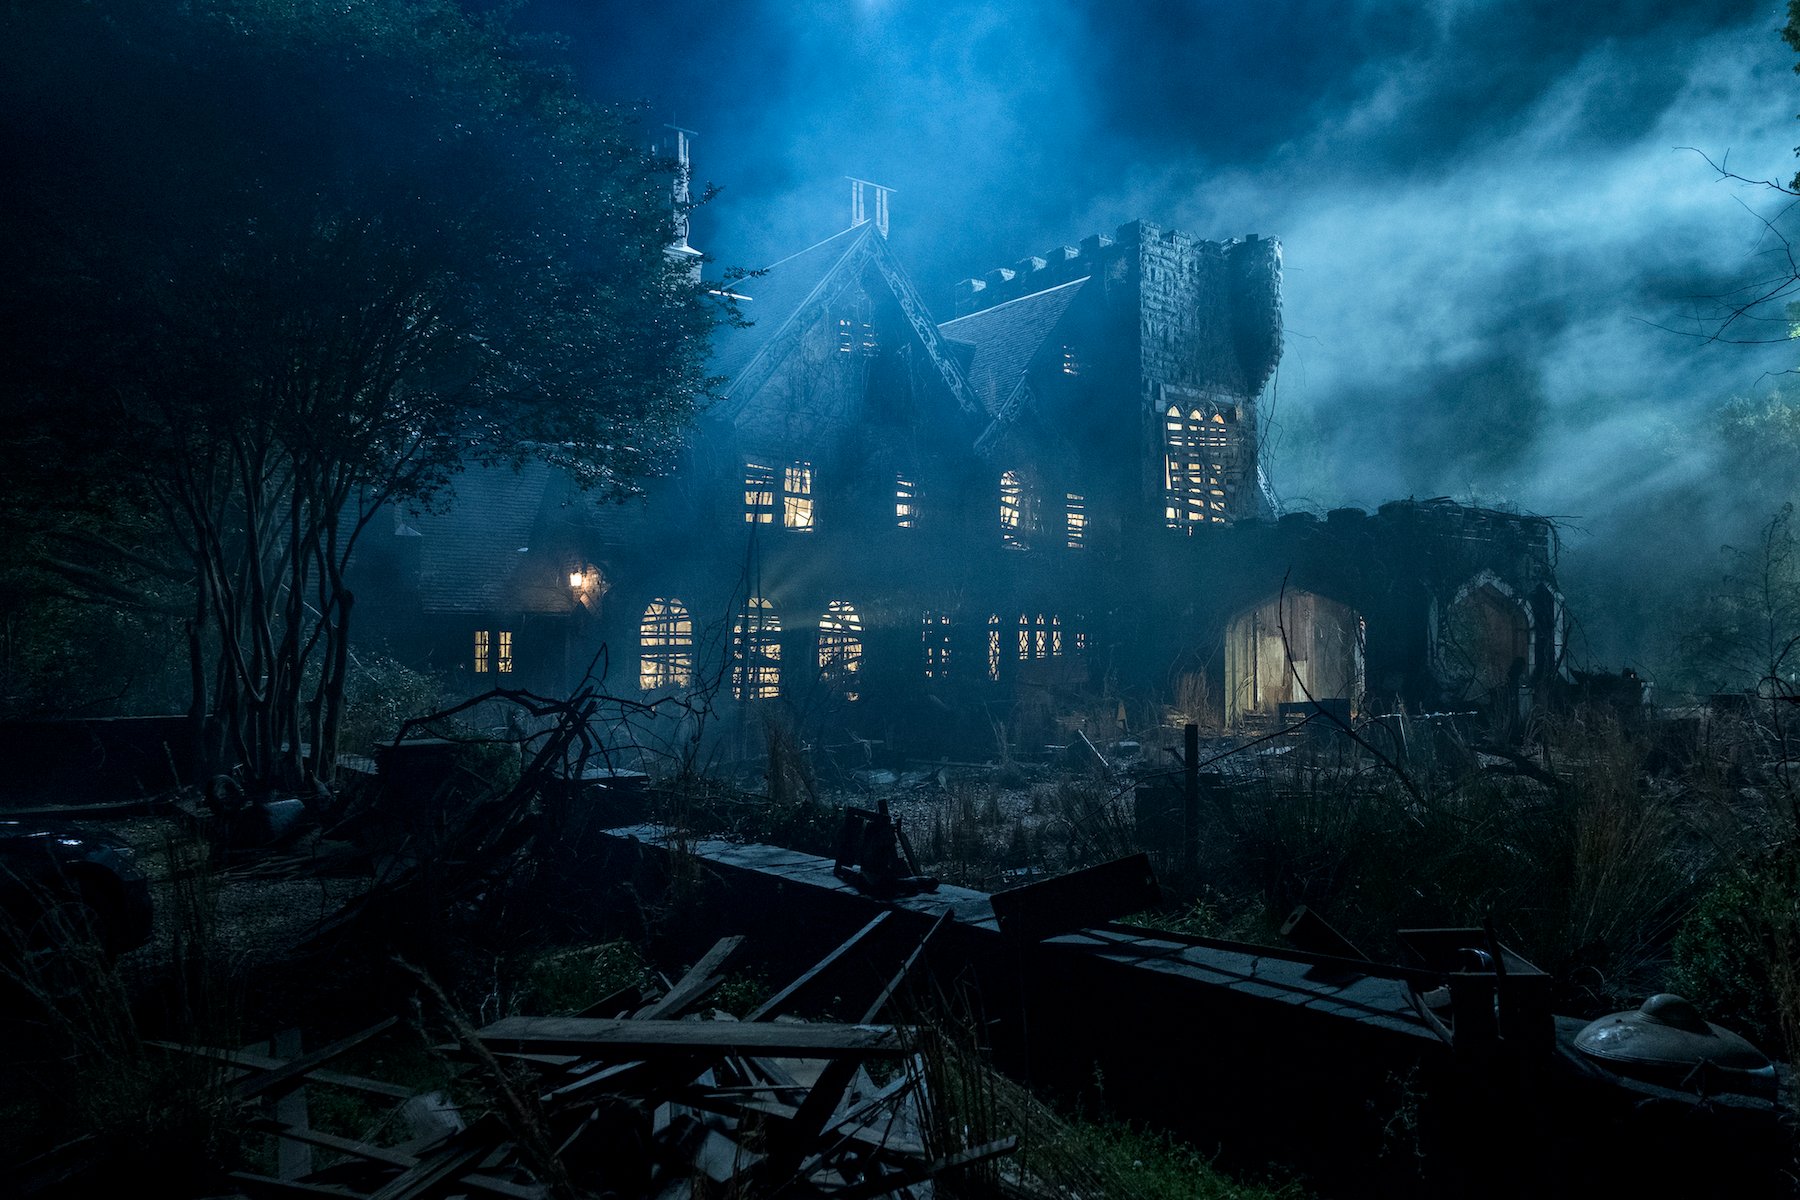 A run-down mansion in a still from 'The Haunting of Hill House'